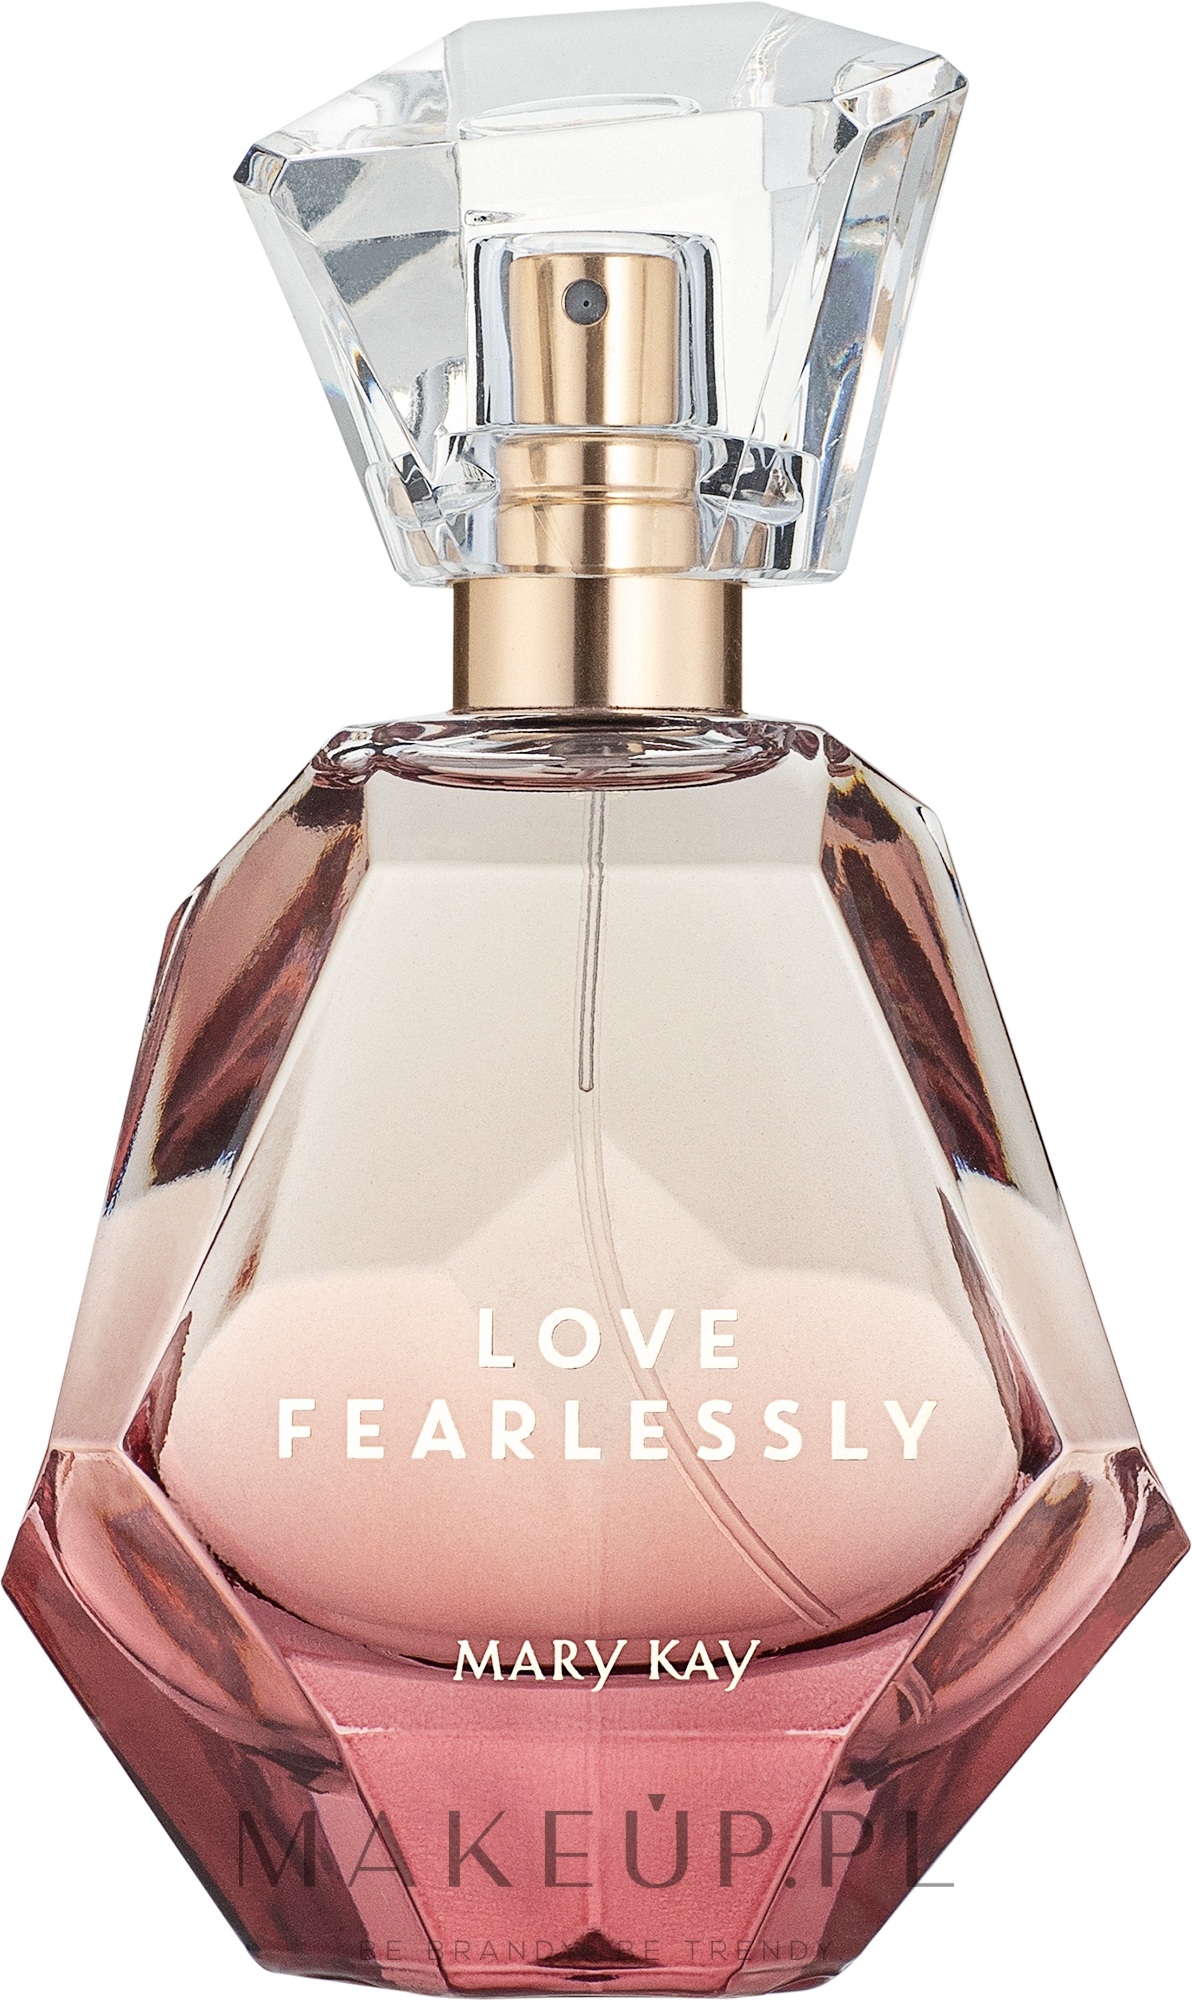 mary kay love fearlessly